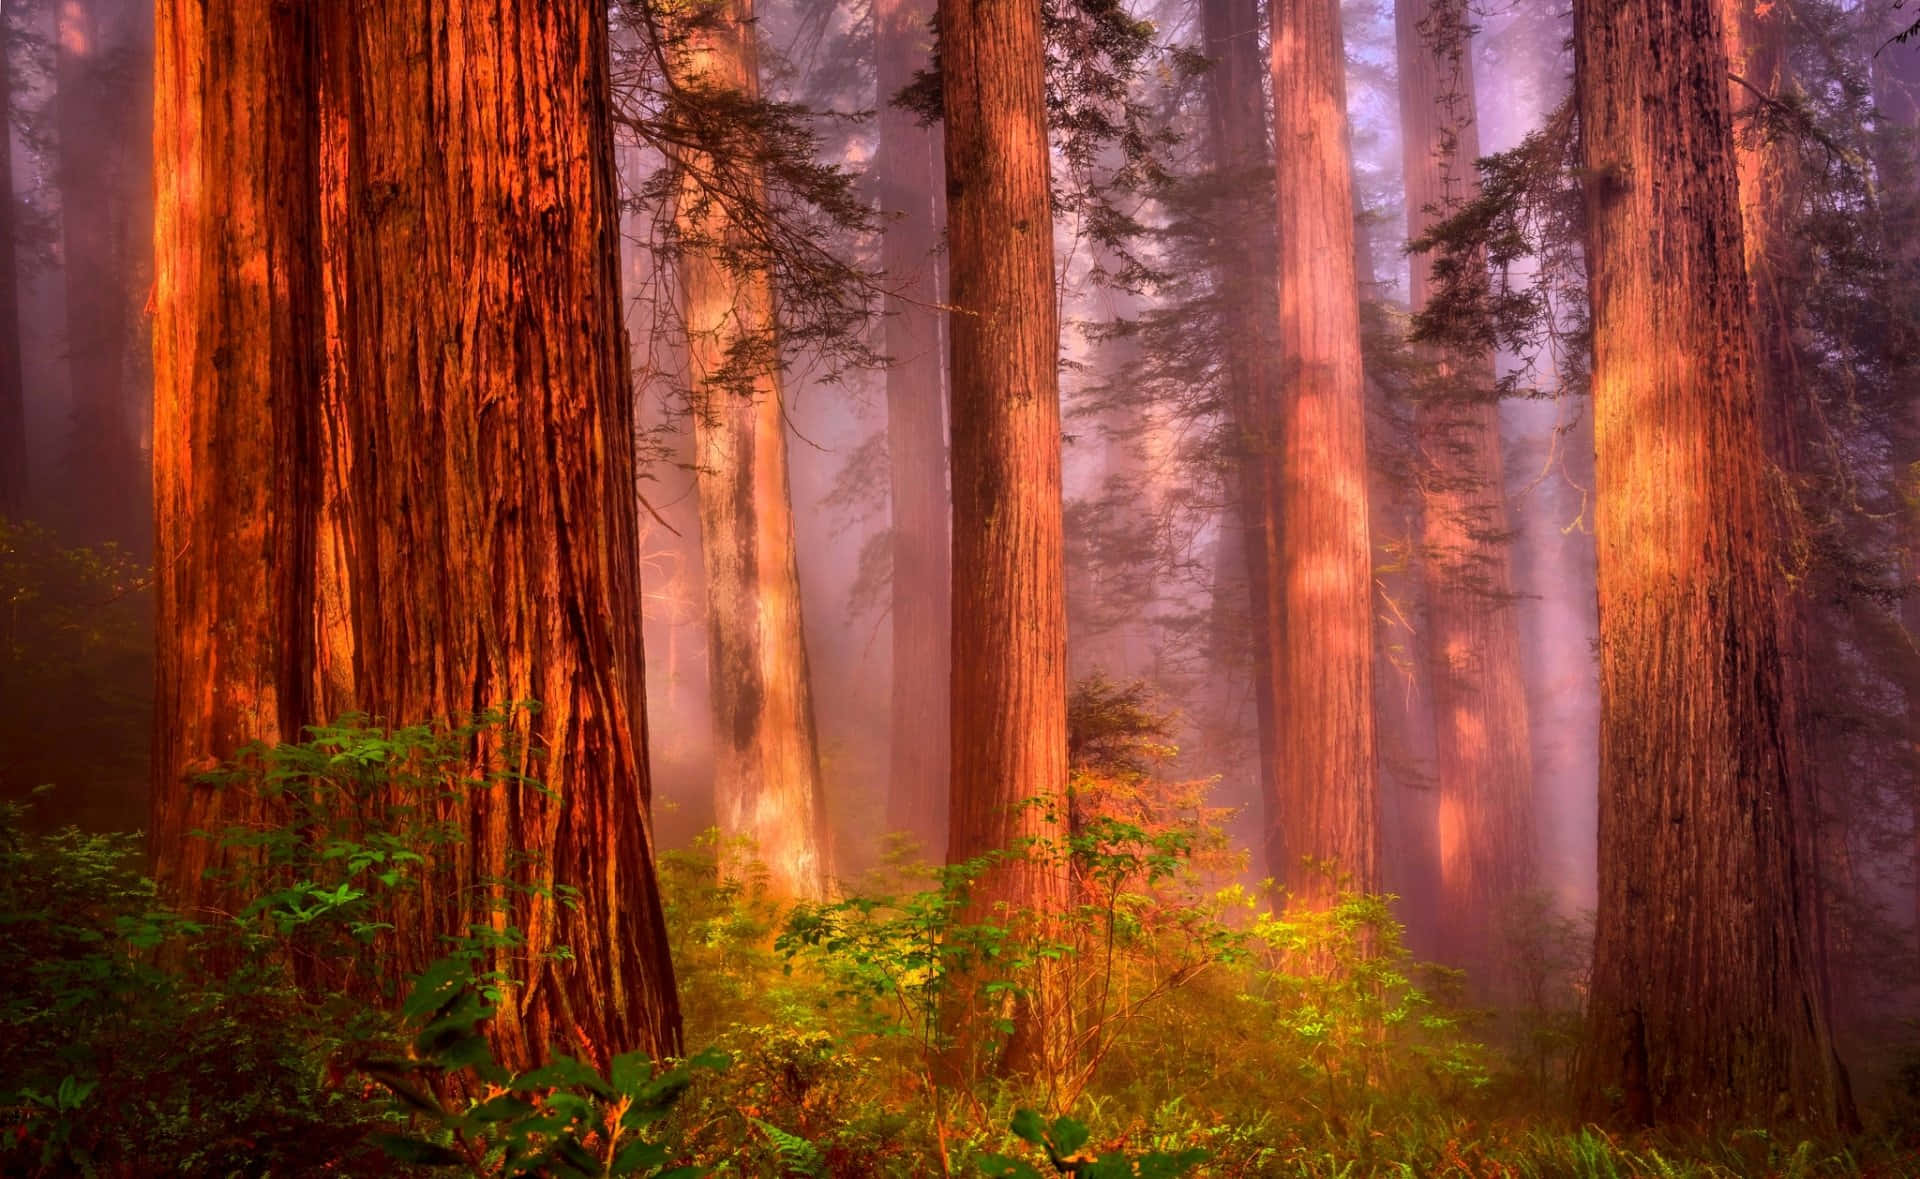 The mighty Redwood trees standing tall in Redwood National and State Parks